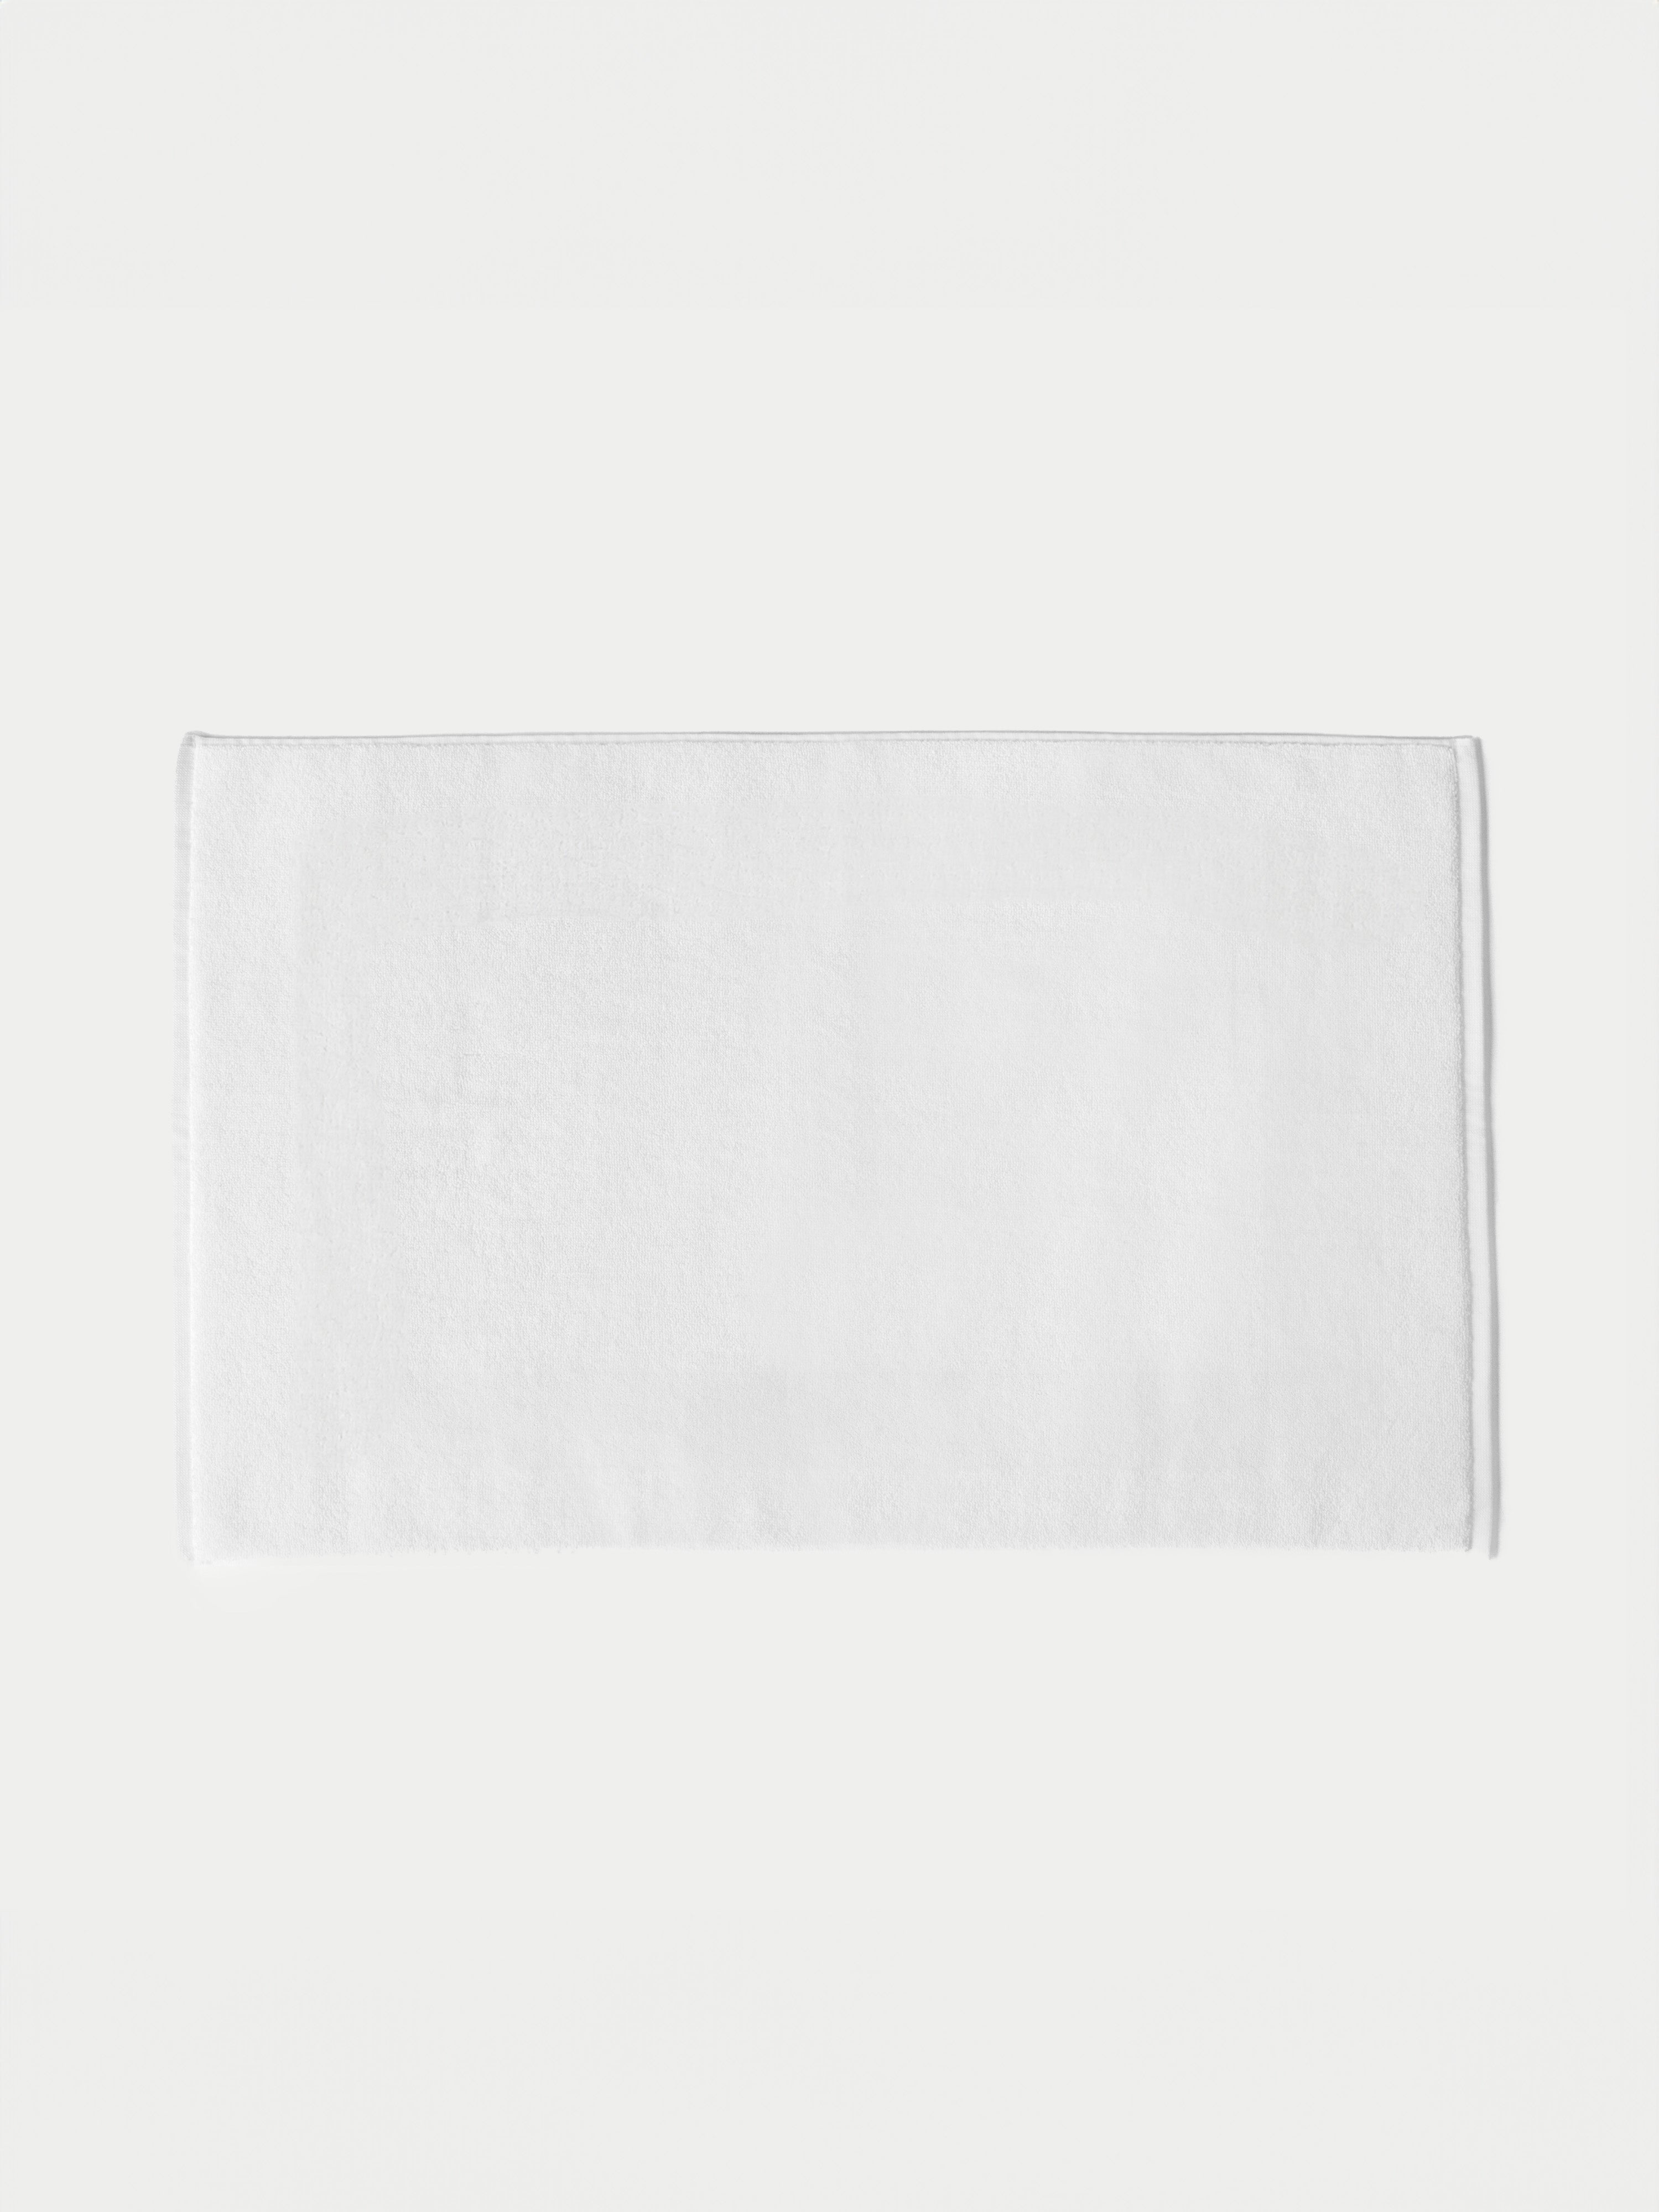 White looped terry bath mat resting on white background. |Color: White